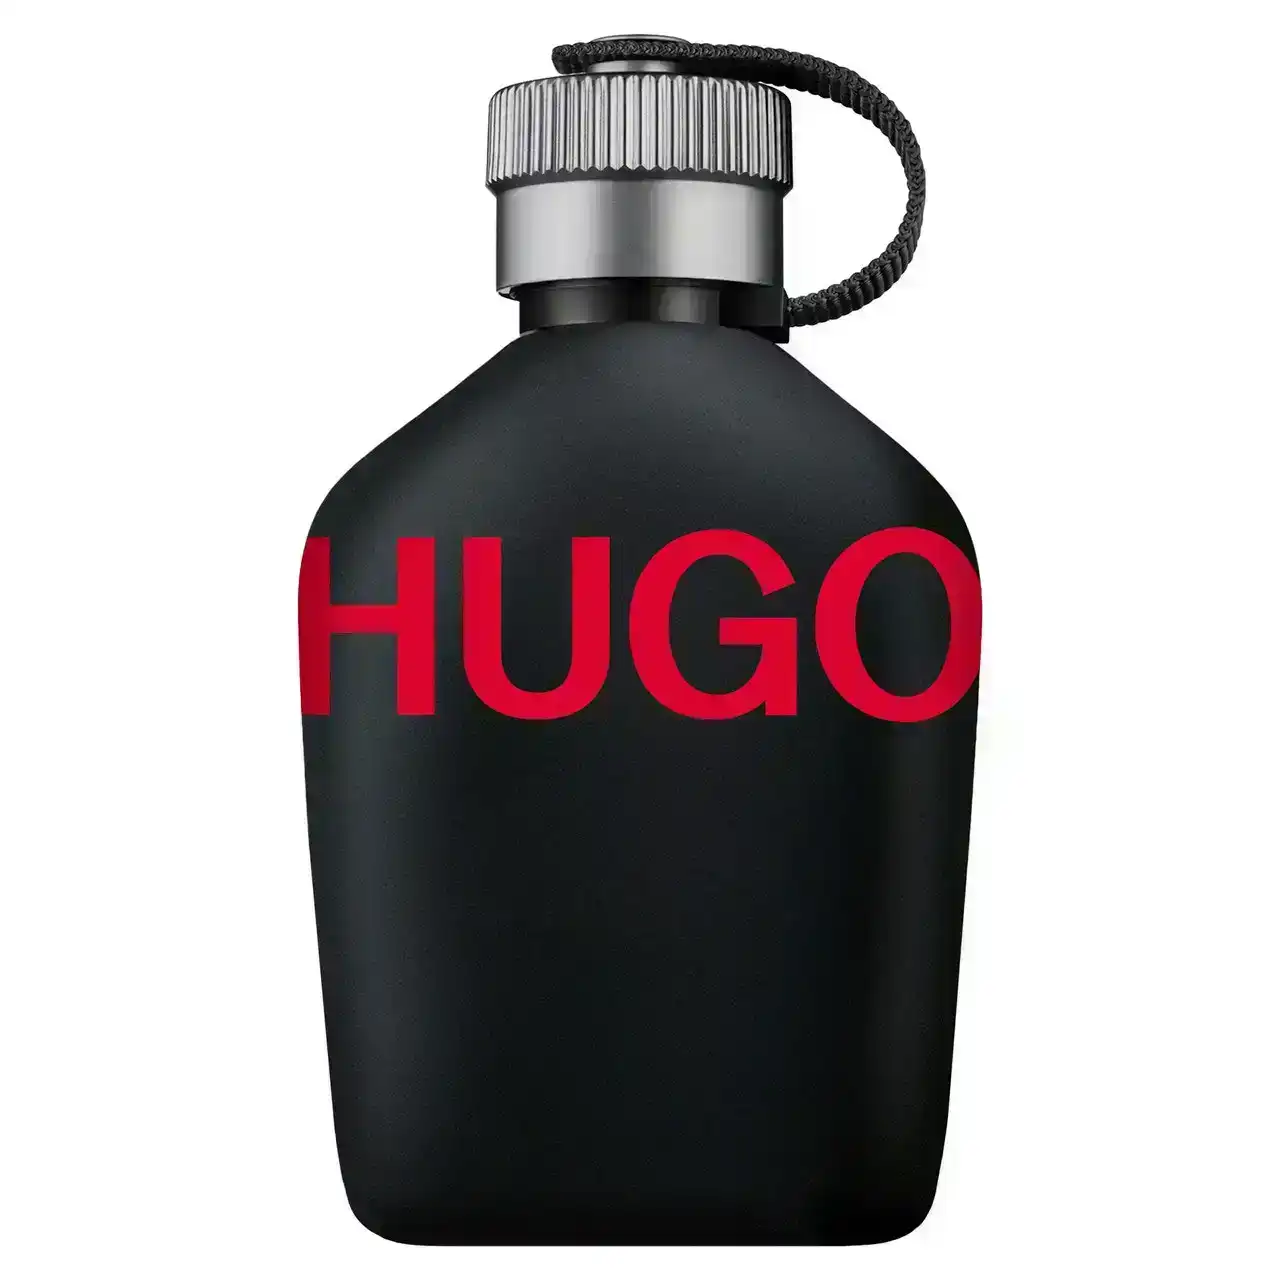 Just Different 125ml EDT By Hugo Boss (Mens)